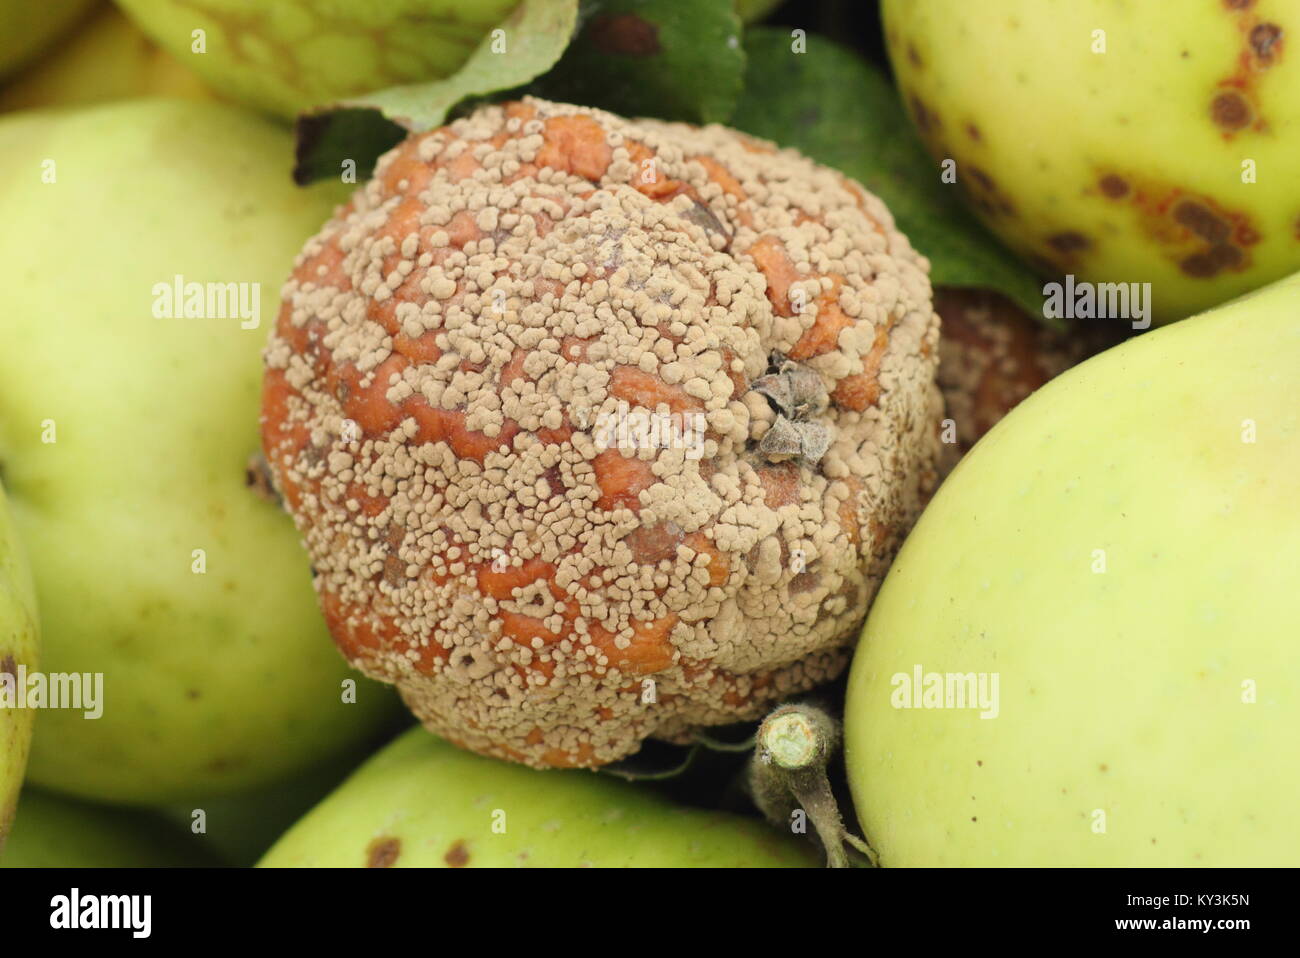 Malus domestica apple with brown rot (Monilinia laxa/monilinia fructigena) removed from tree in English orchard to discourage disease spread Stock Photo